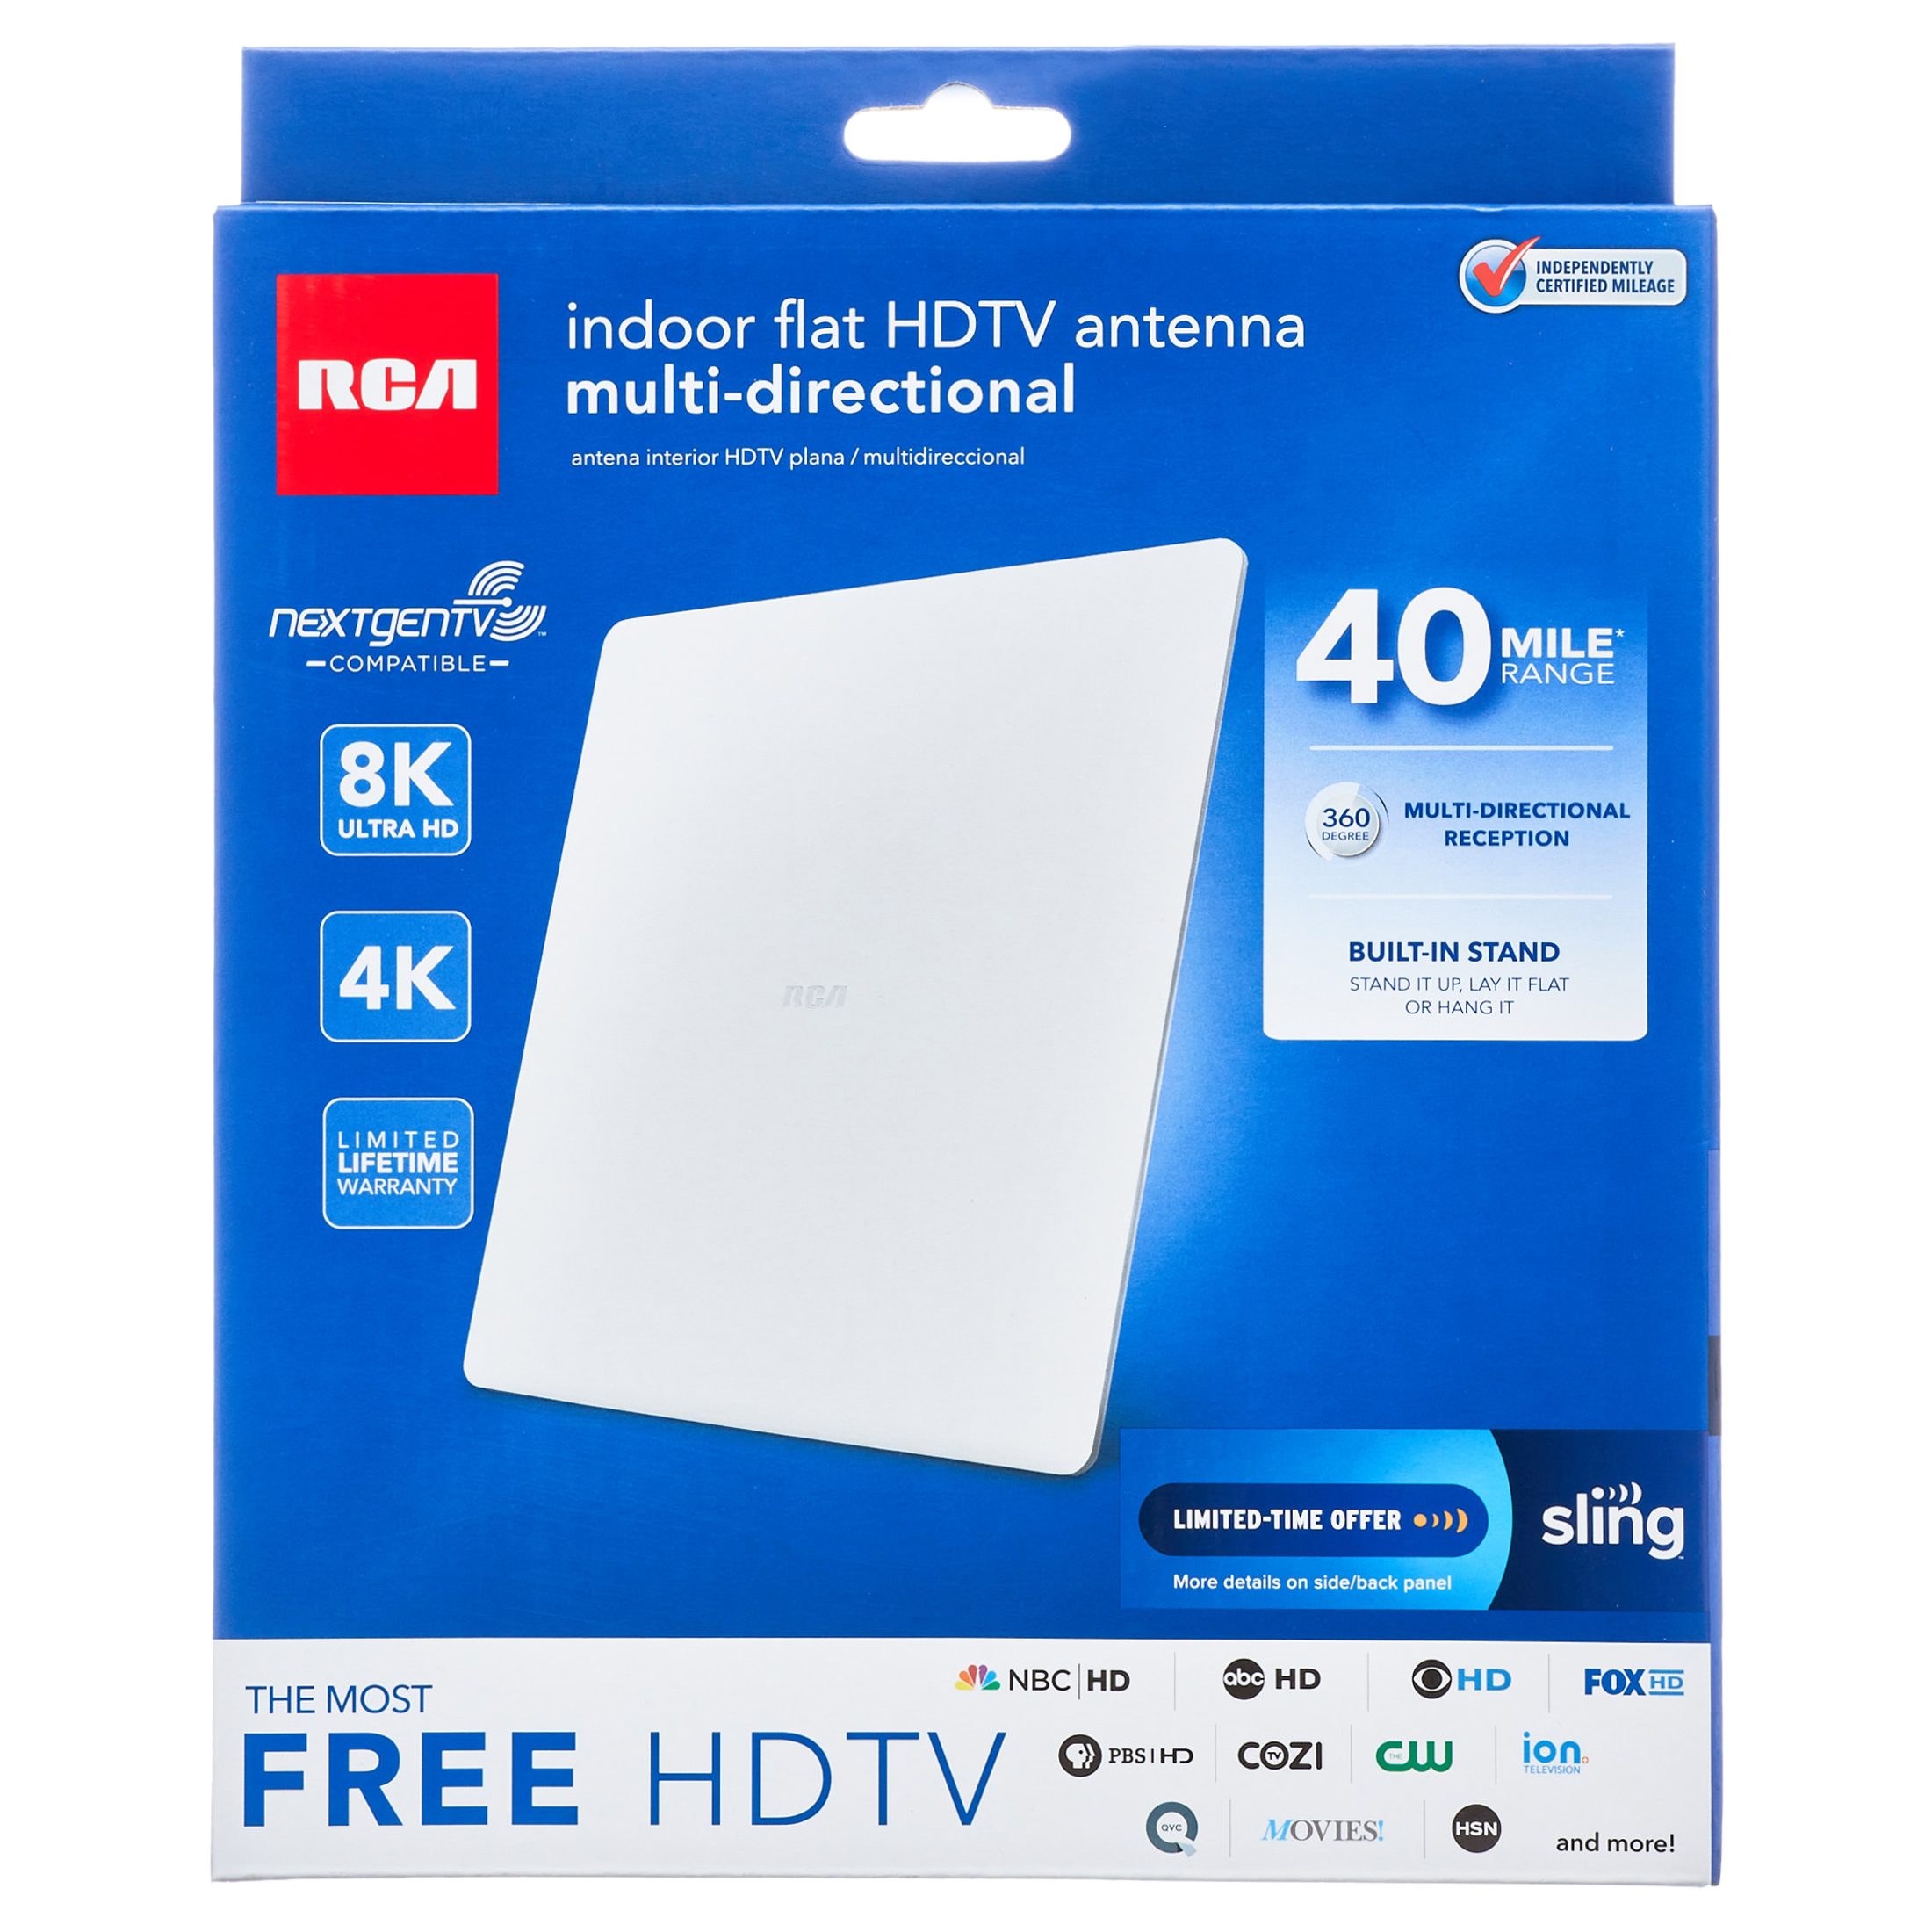 RCA Indoor Flat HDTV Antenna - Multi-Directional - image 1 of 8